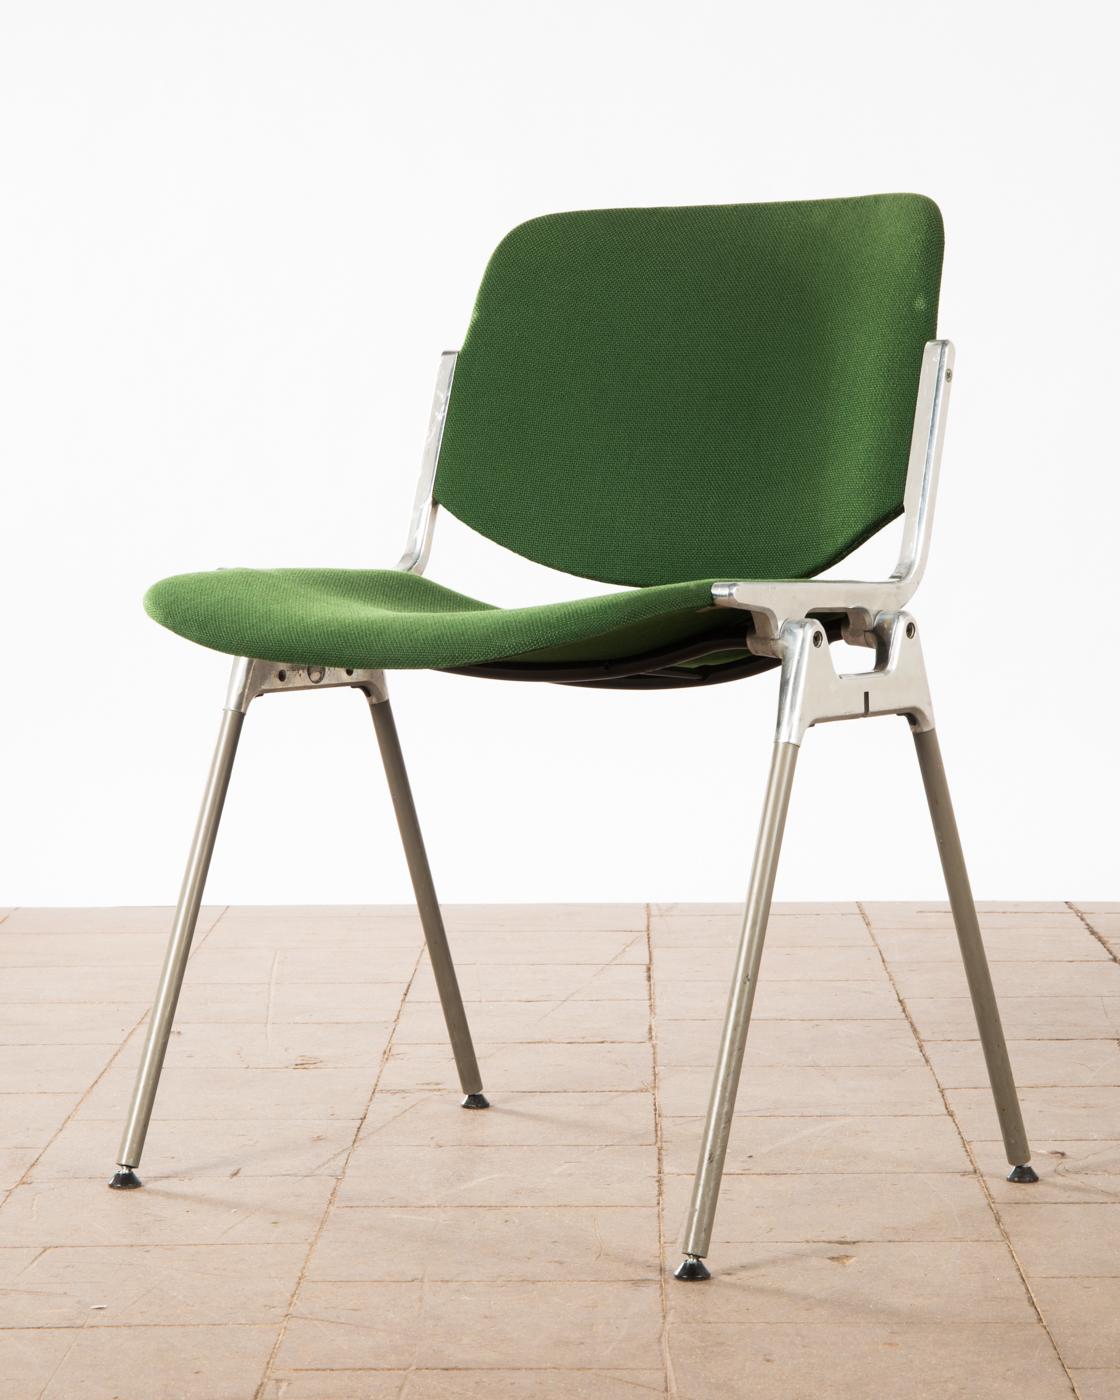 Mid-20th Century Green Stackable Chairs by Giancarlo Piretti for Castelli For Sale